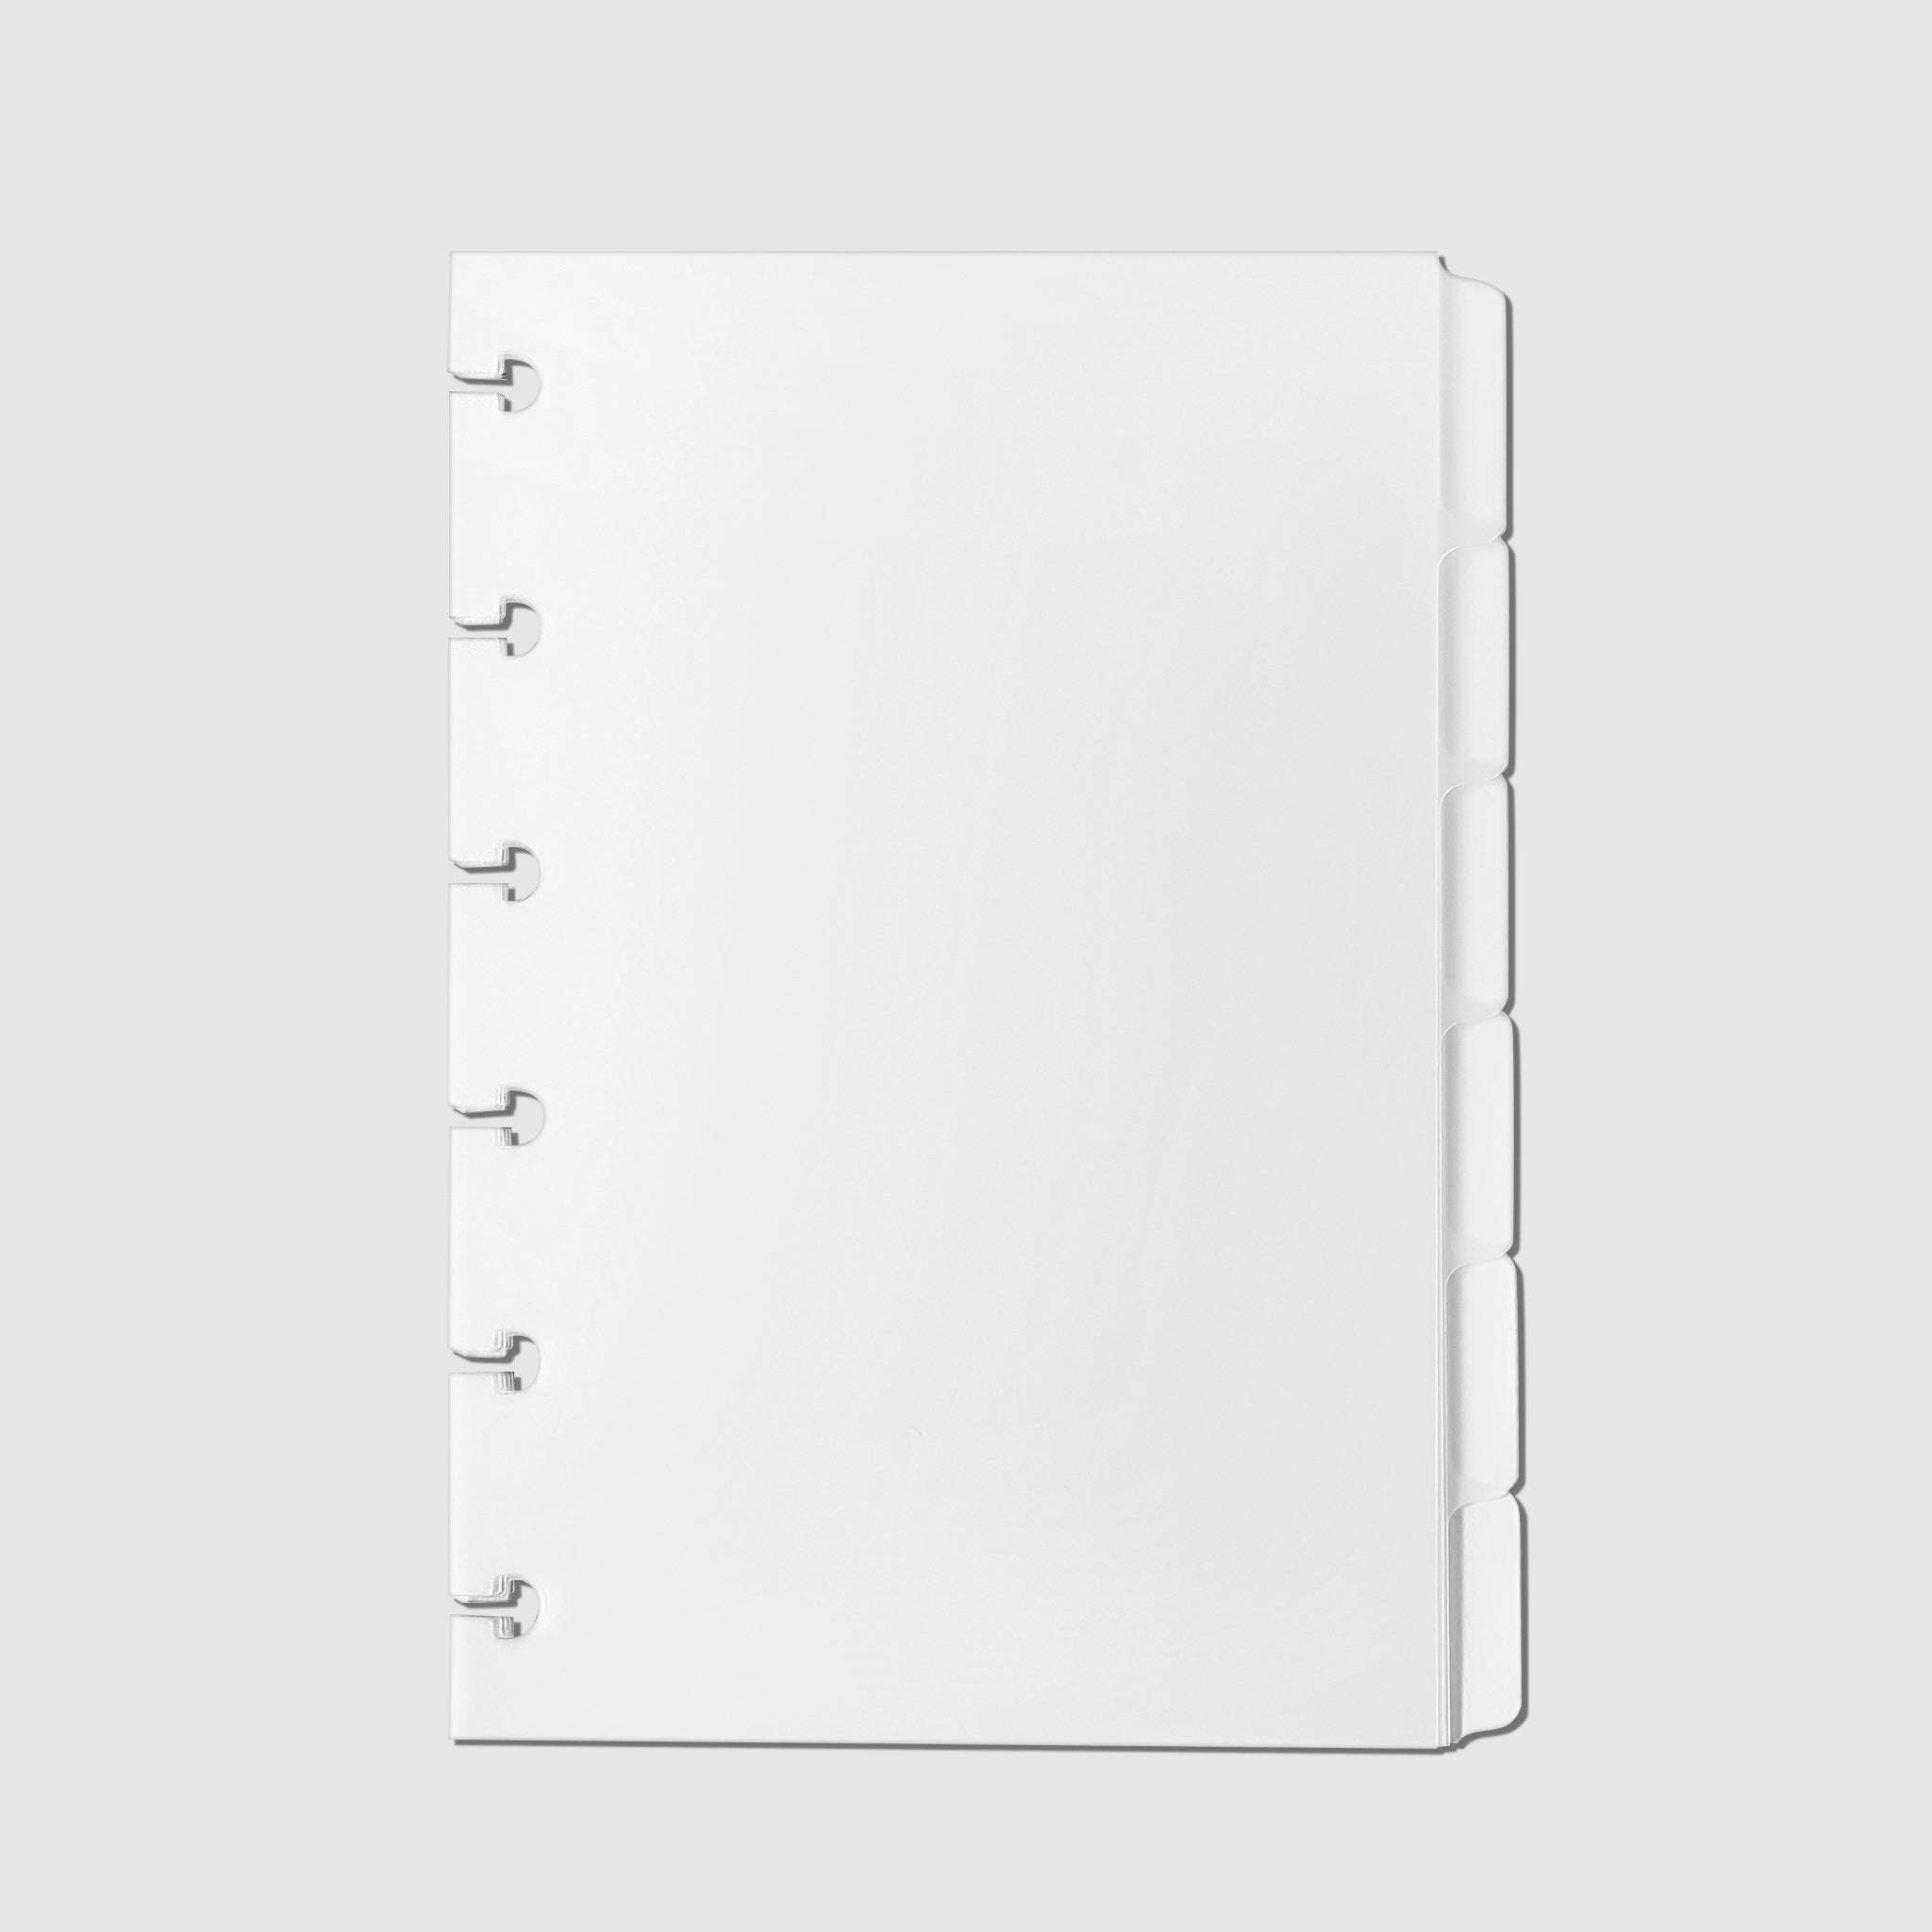 Blank Tab Sticky Note Set  Cloth & Paper – CLOTH & PAPER